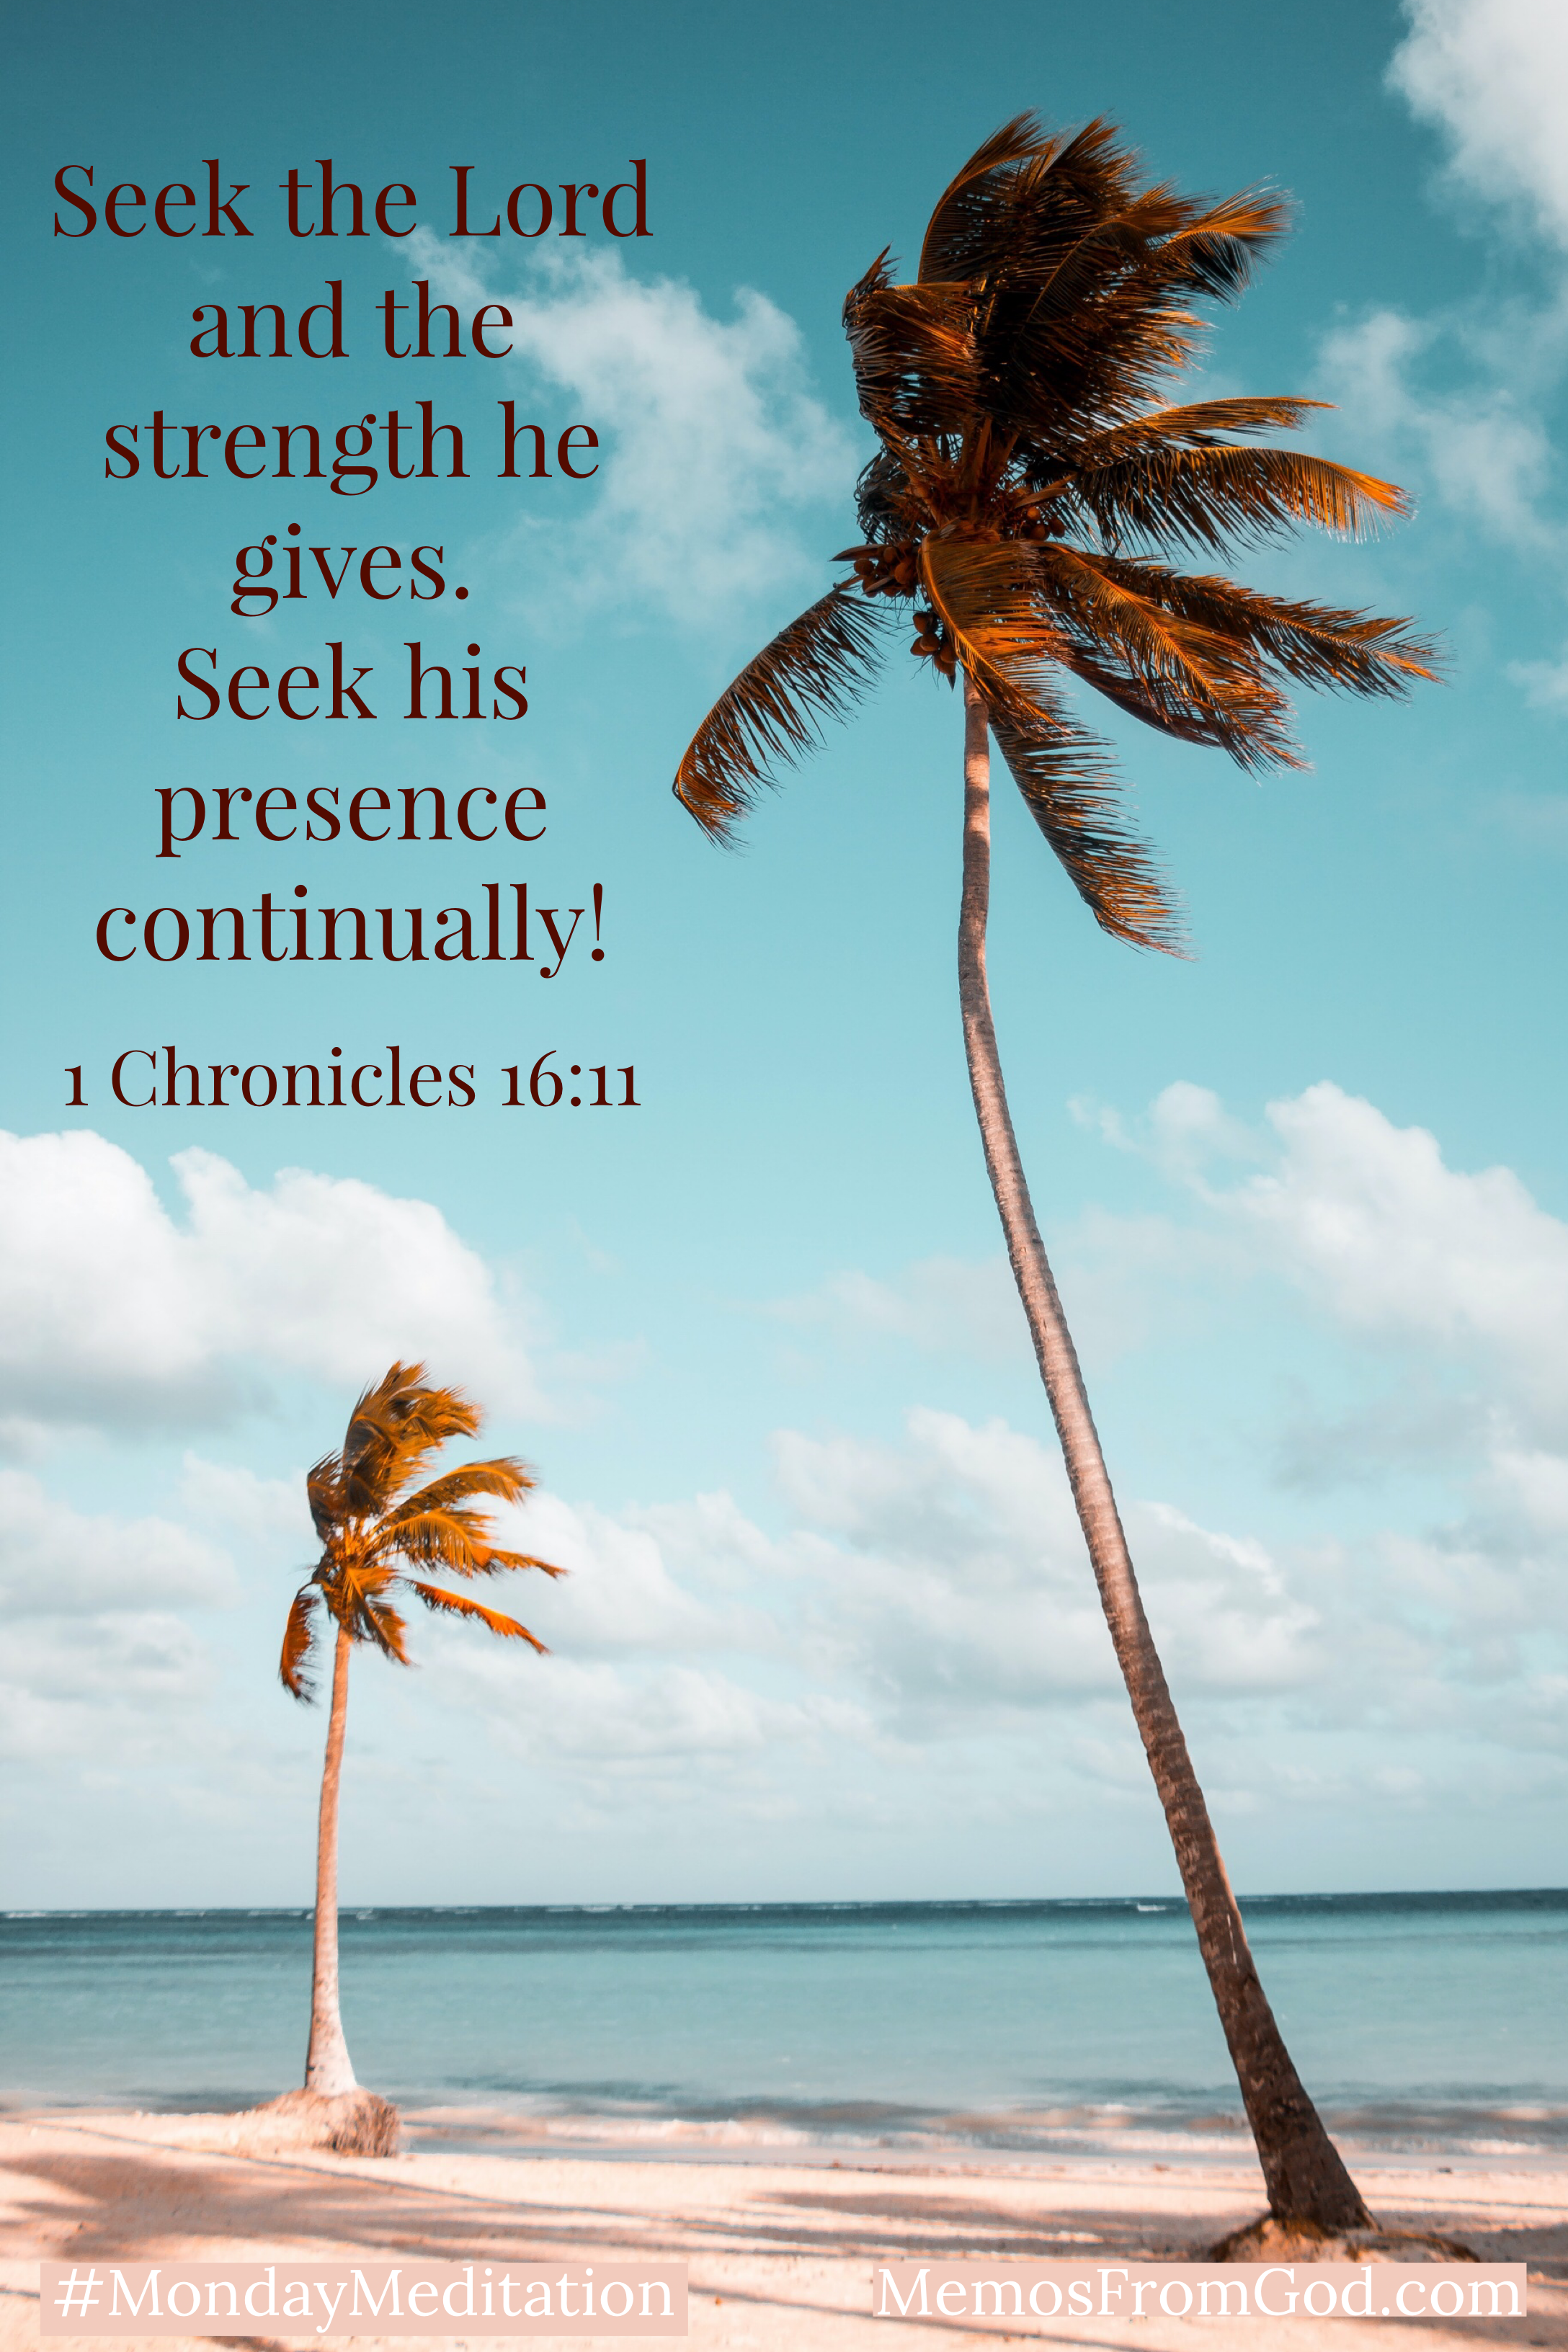 Two palm trees, one large and one small, growing on a peach-coloured, sandy beach at the edge of turquoise waters, beneath a turquoise sky with fluffy, white clouds. Caption: Seek the Lord and the strength he gives. Seek his presence continually! 1 Chronicles 16:11